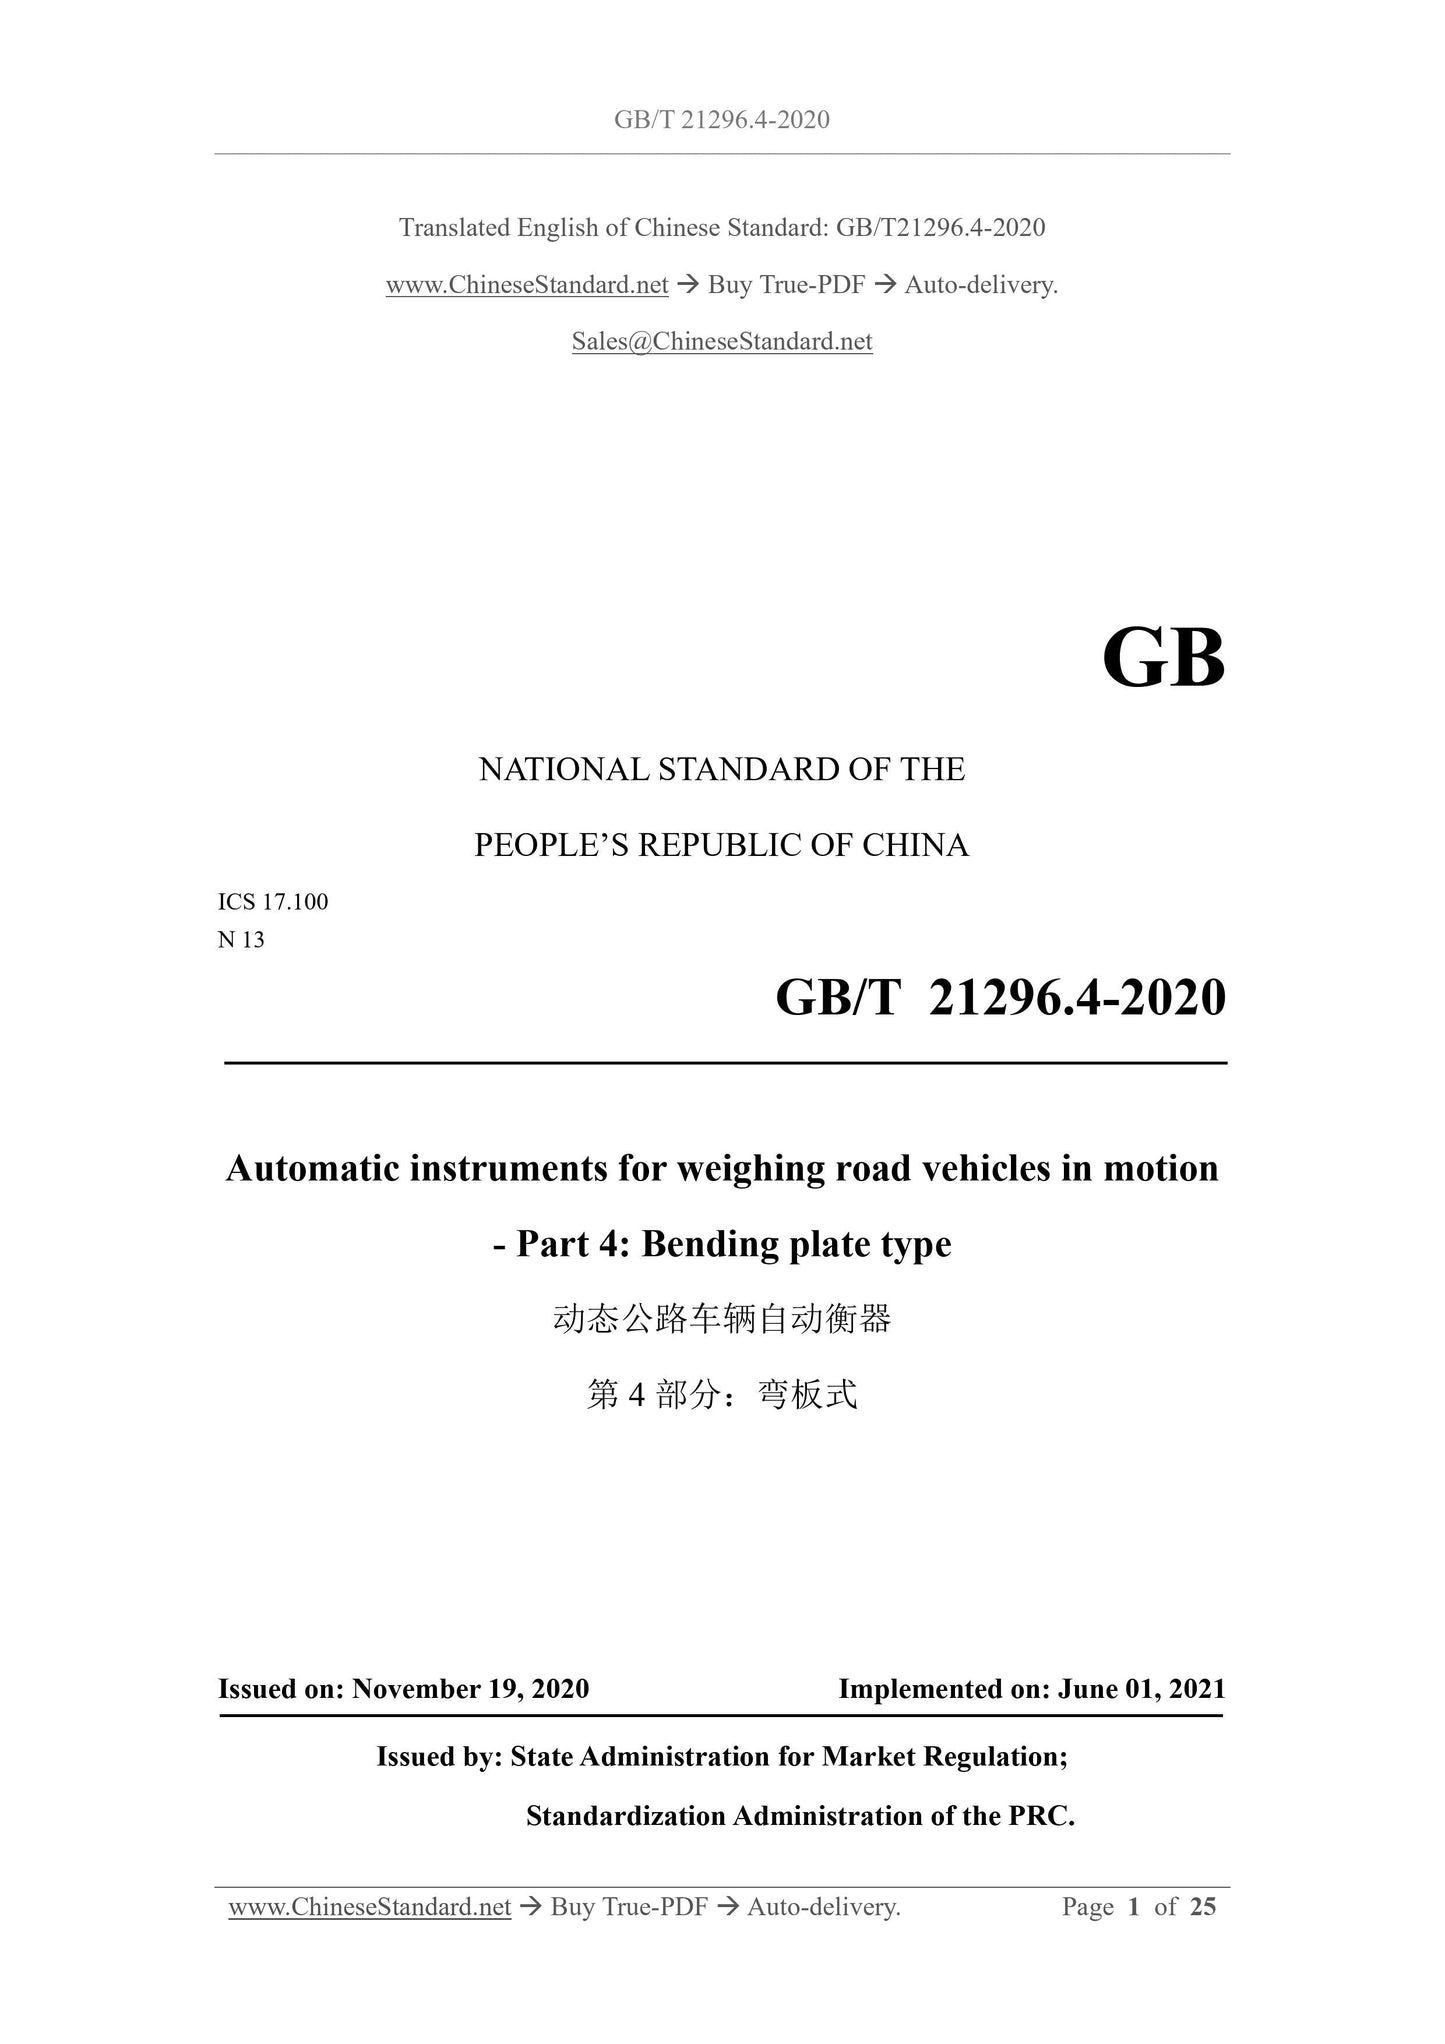 GB/T 21296.4-2020 Page 1